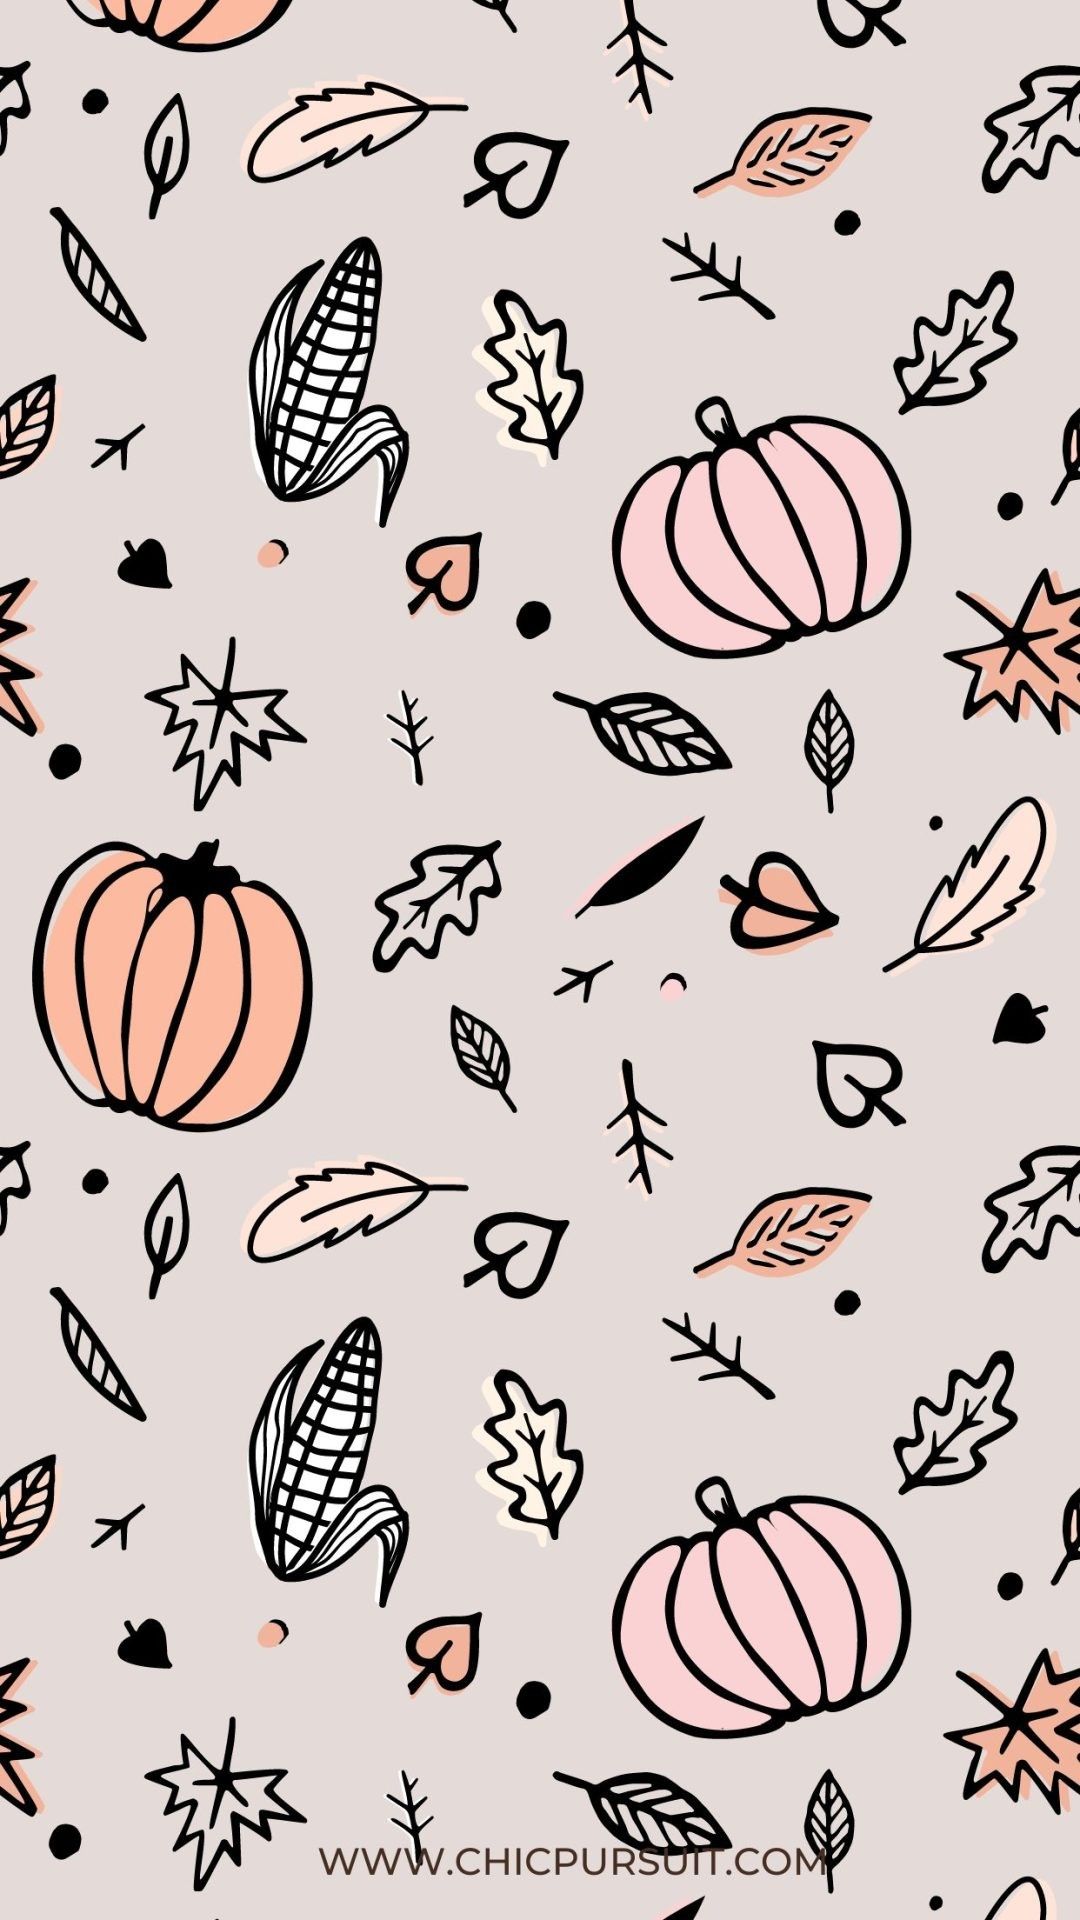 A pattern with pumpkins, leaves and other items - Thanksgiving